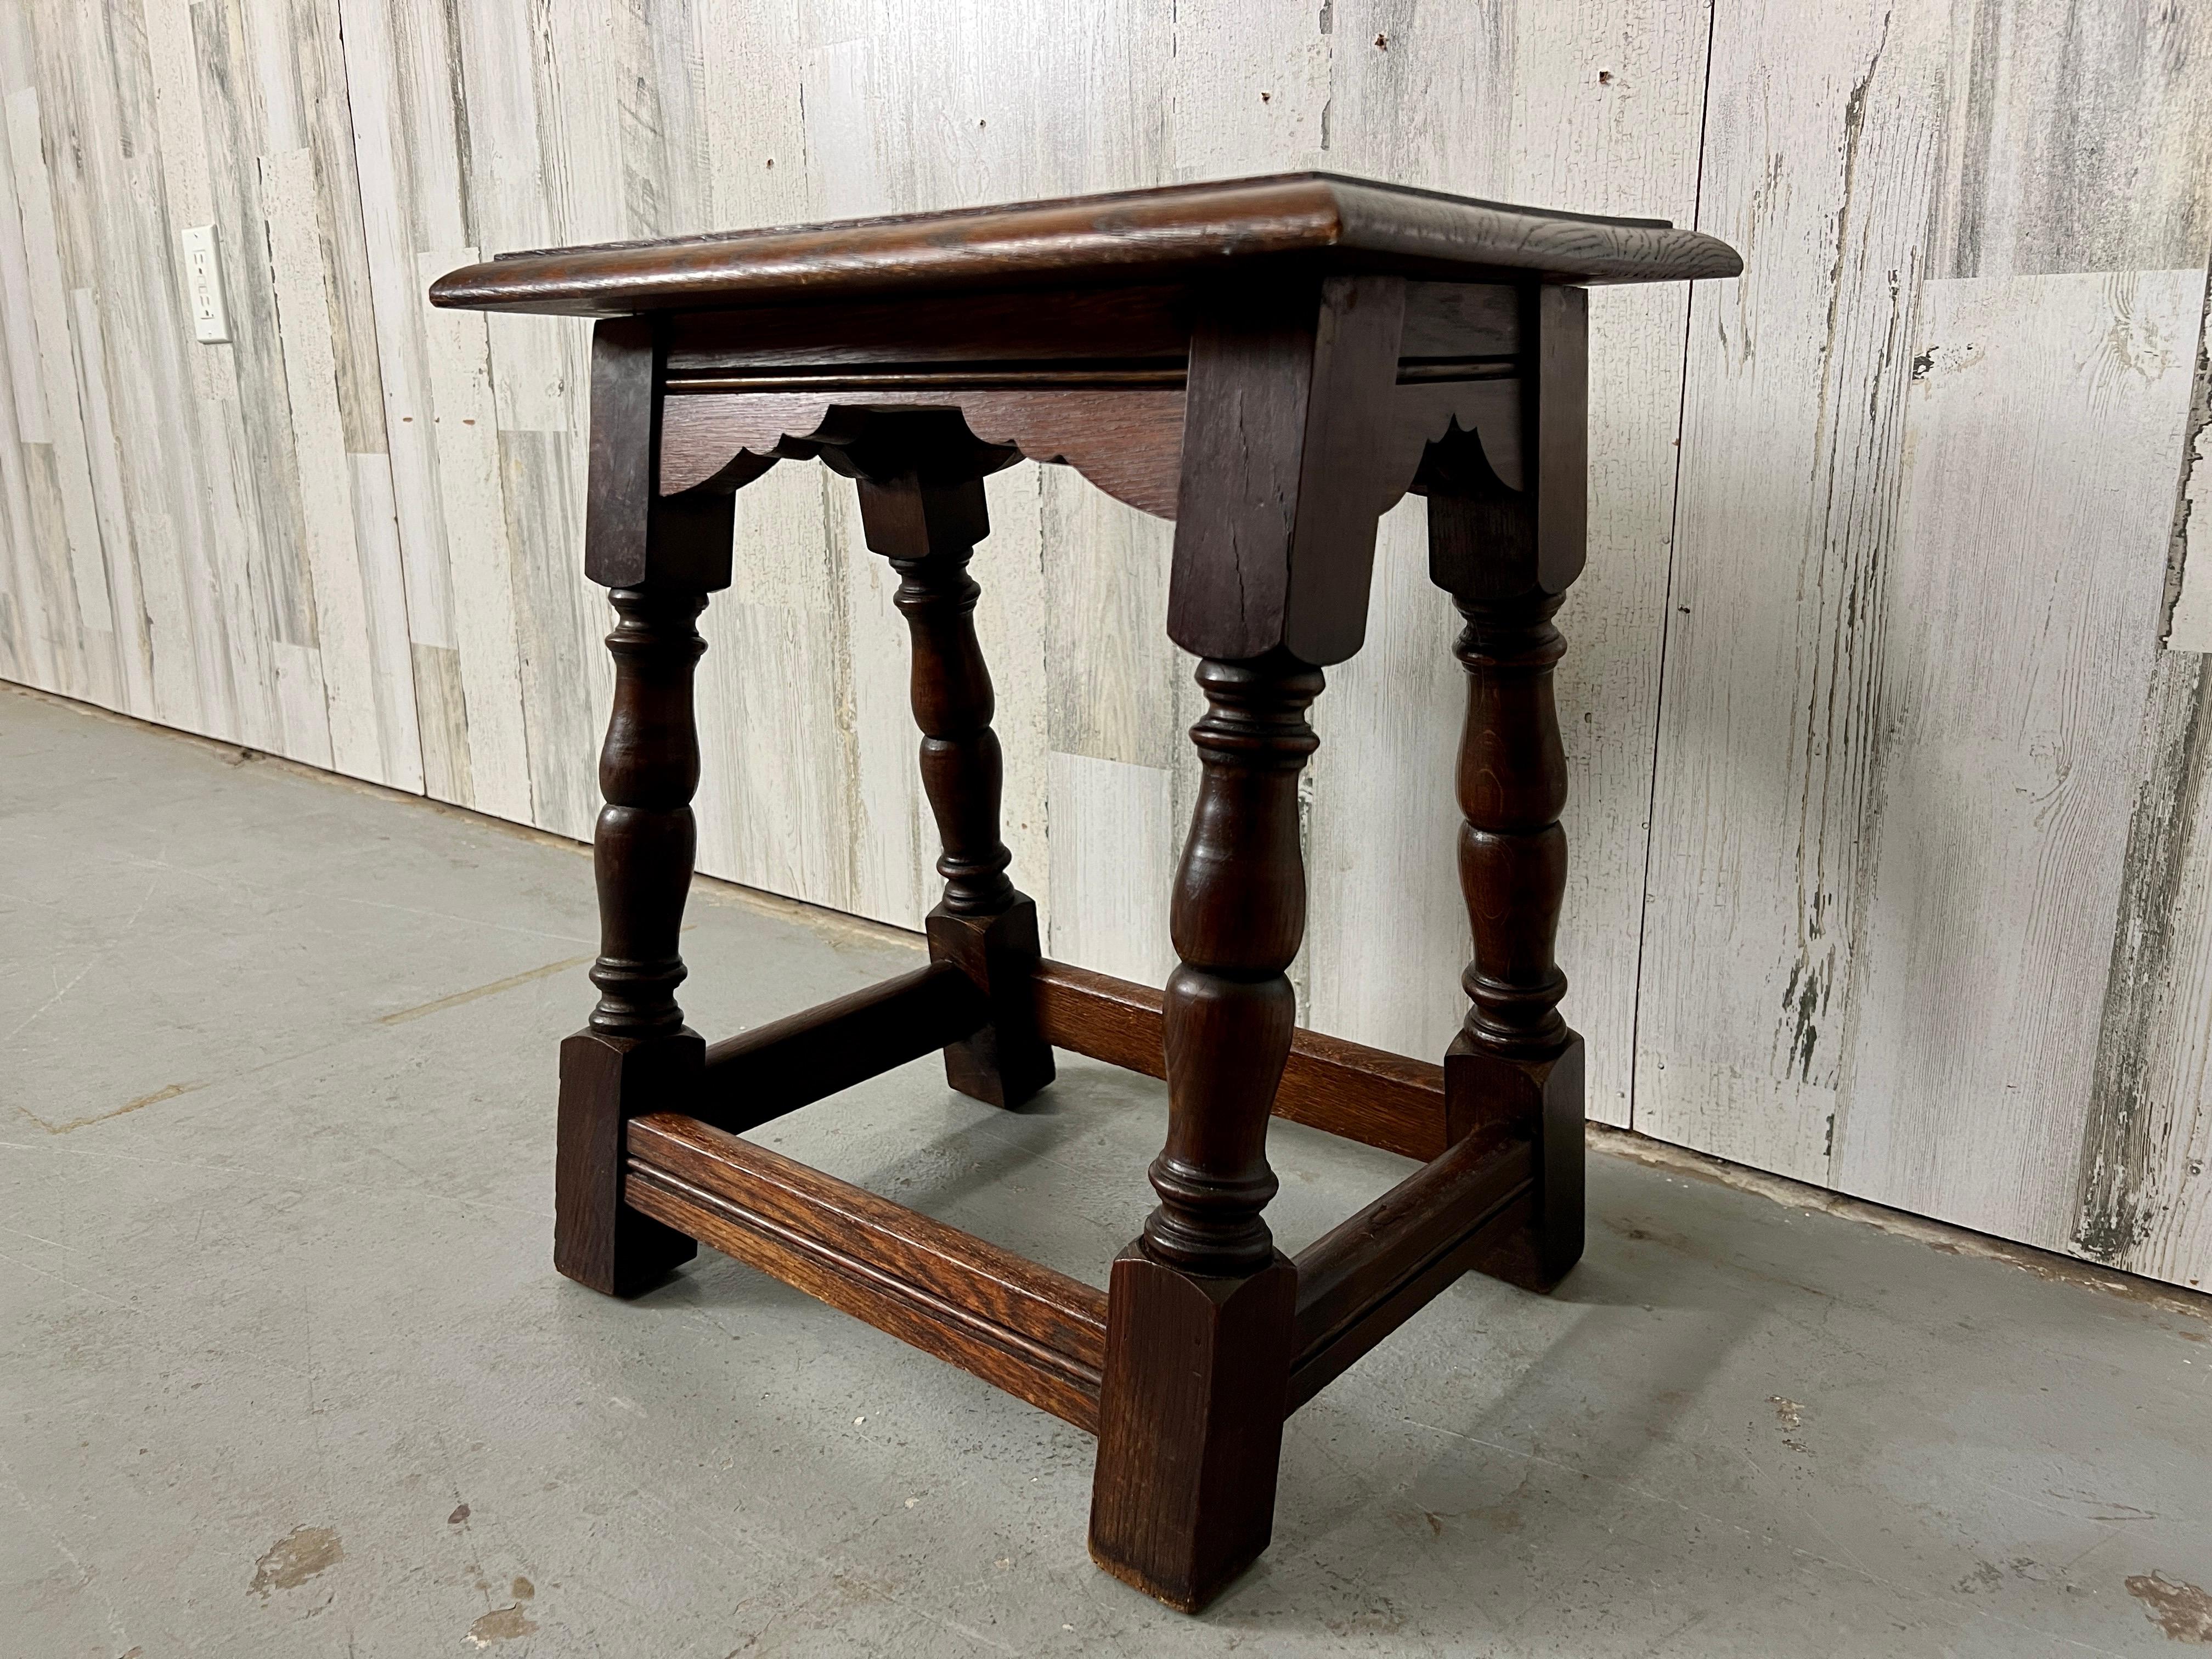 European Antique Rustic Stool / Table For Sale